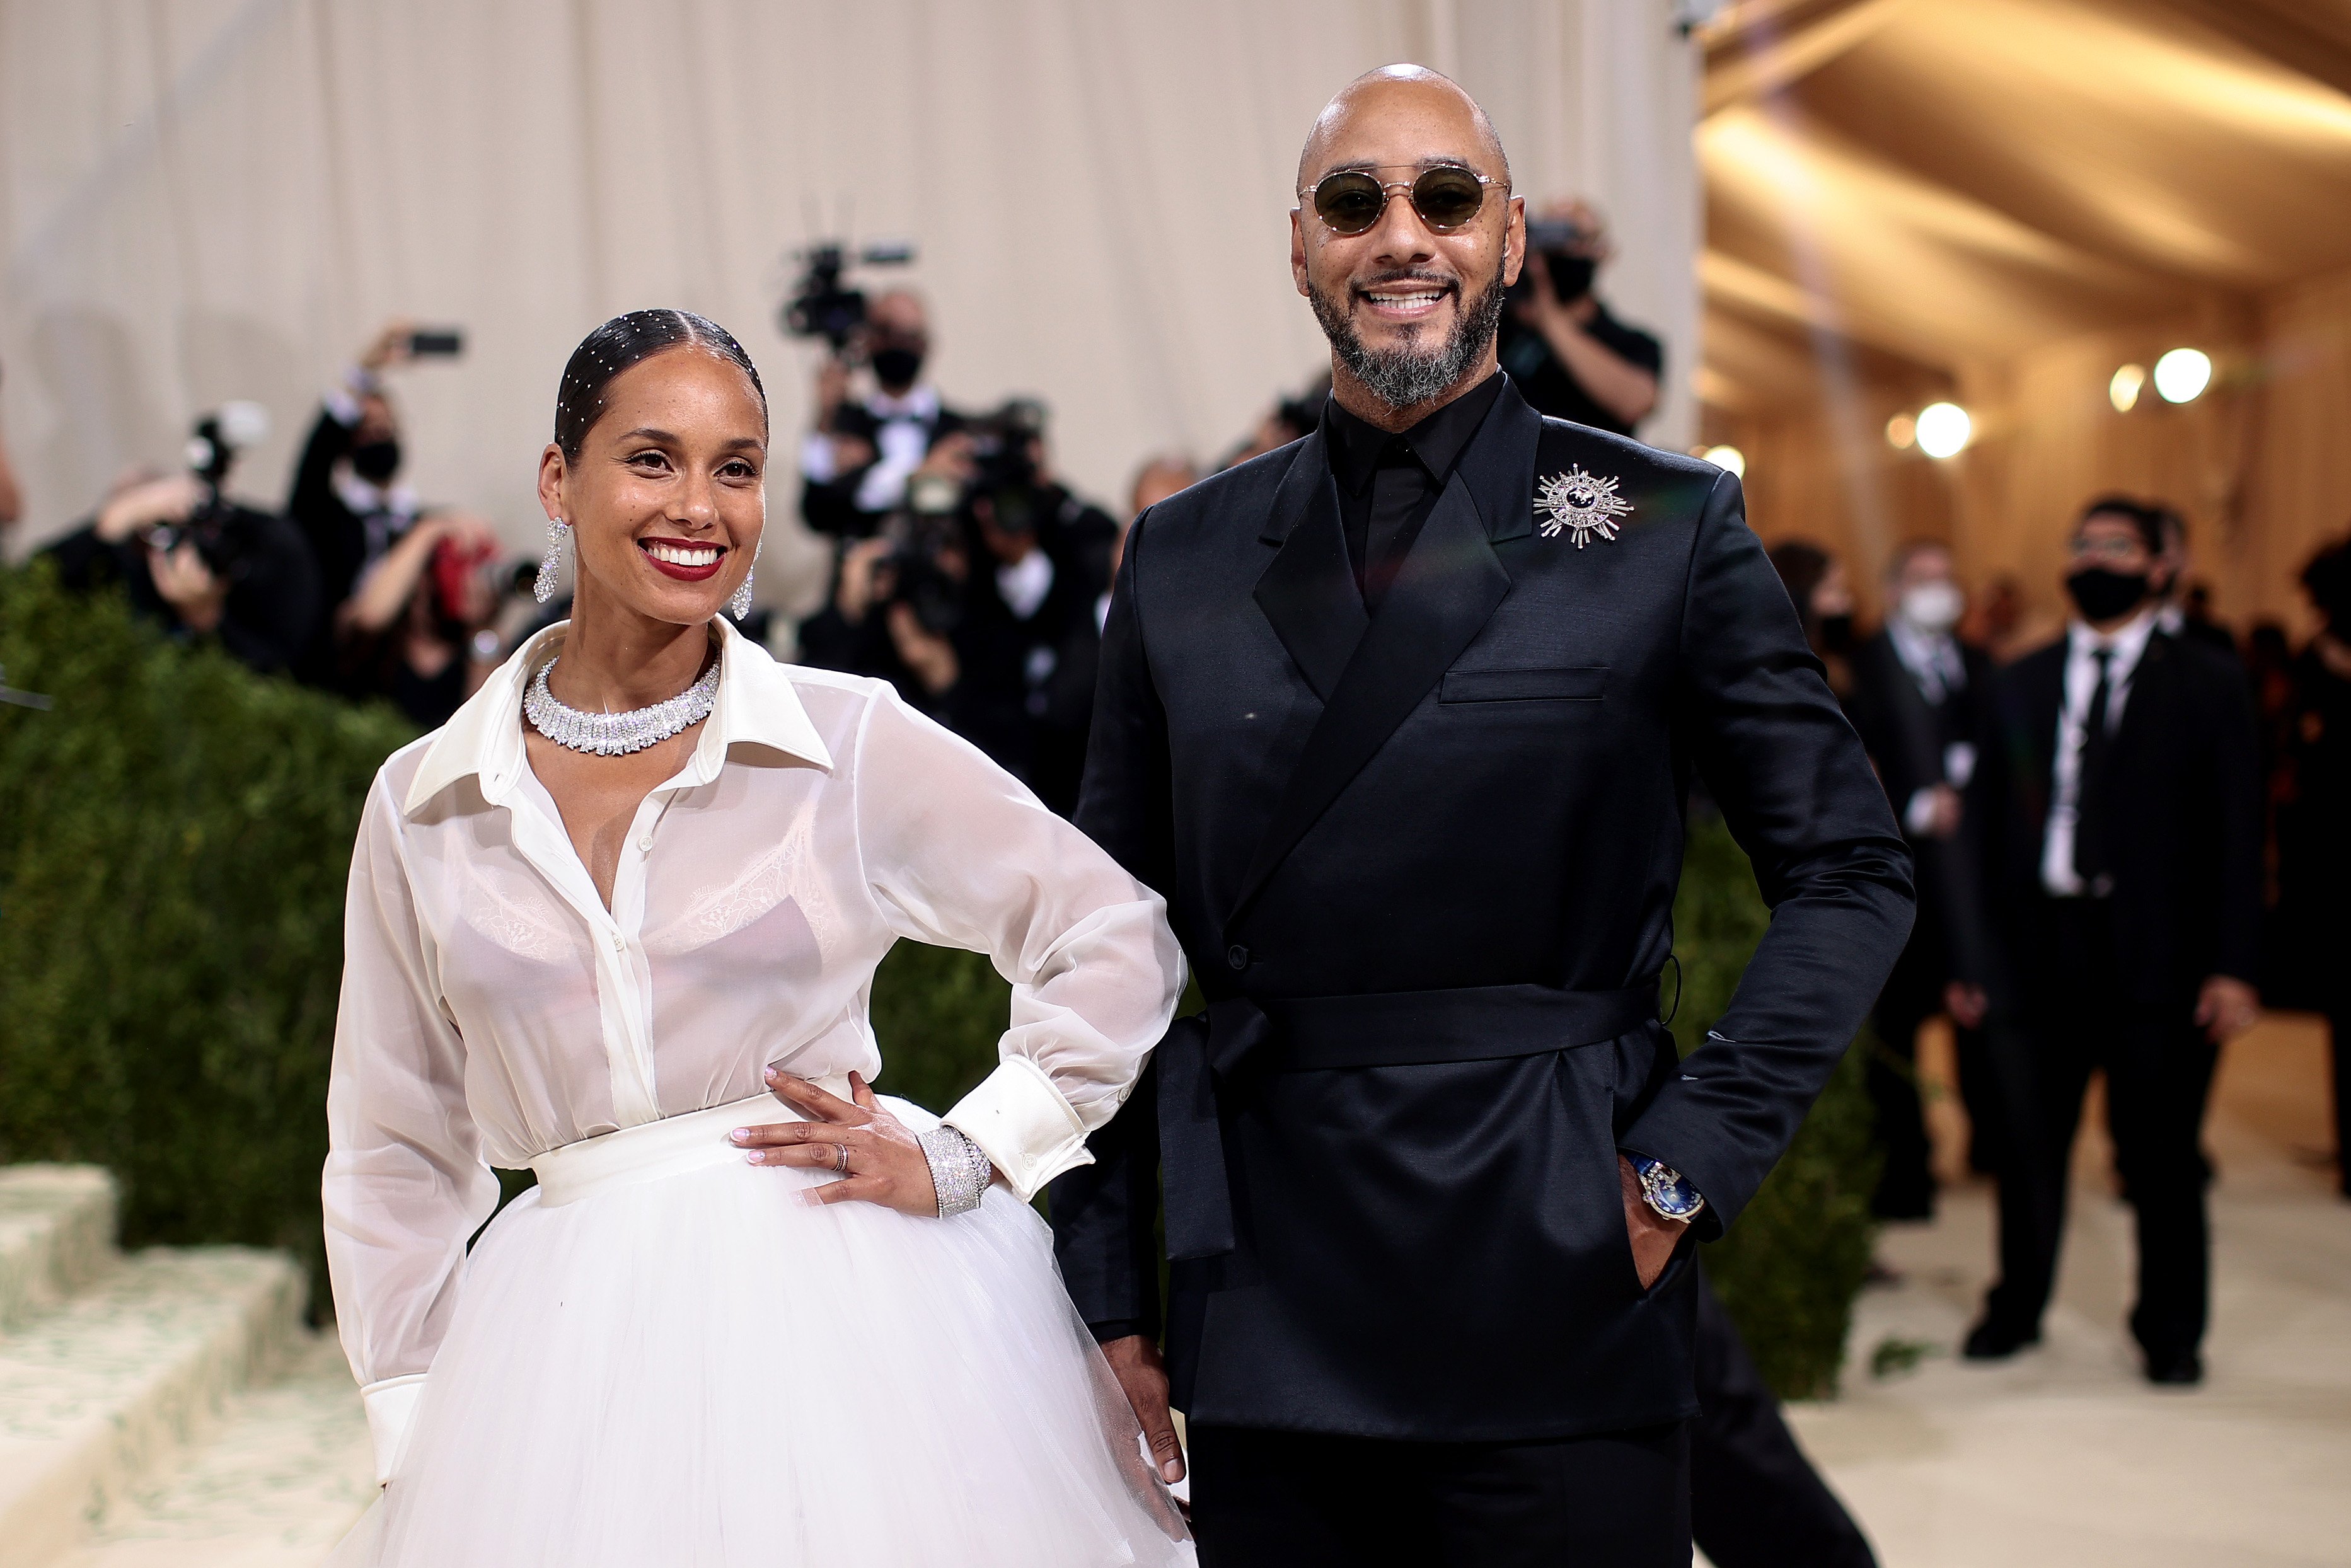 Alicia Keys and Swizz Beatz pose for photos at The 2021 Met Gala